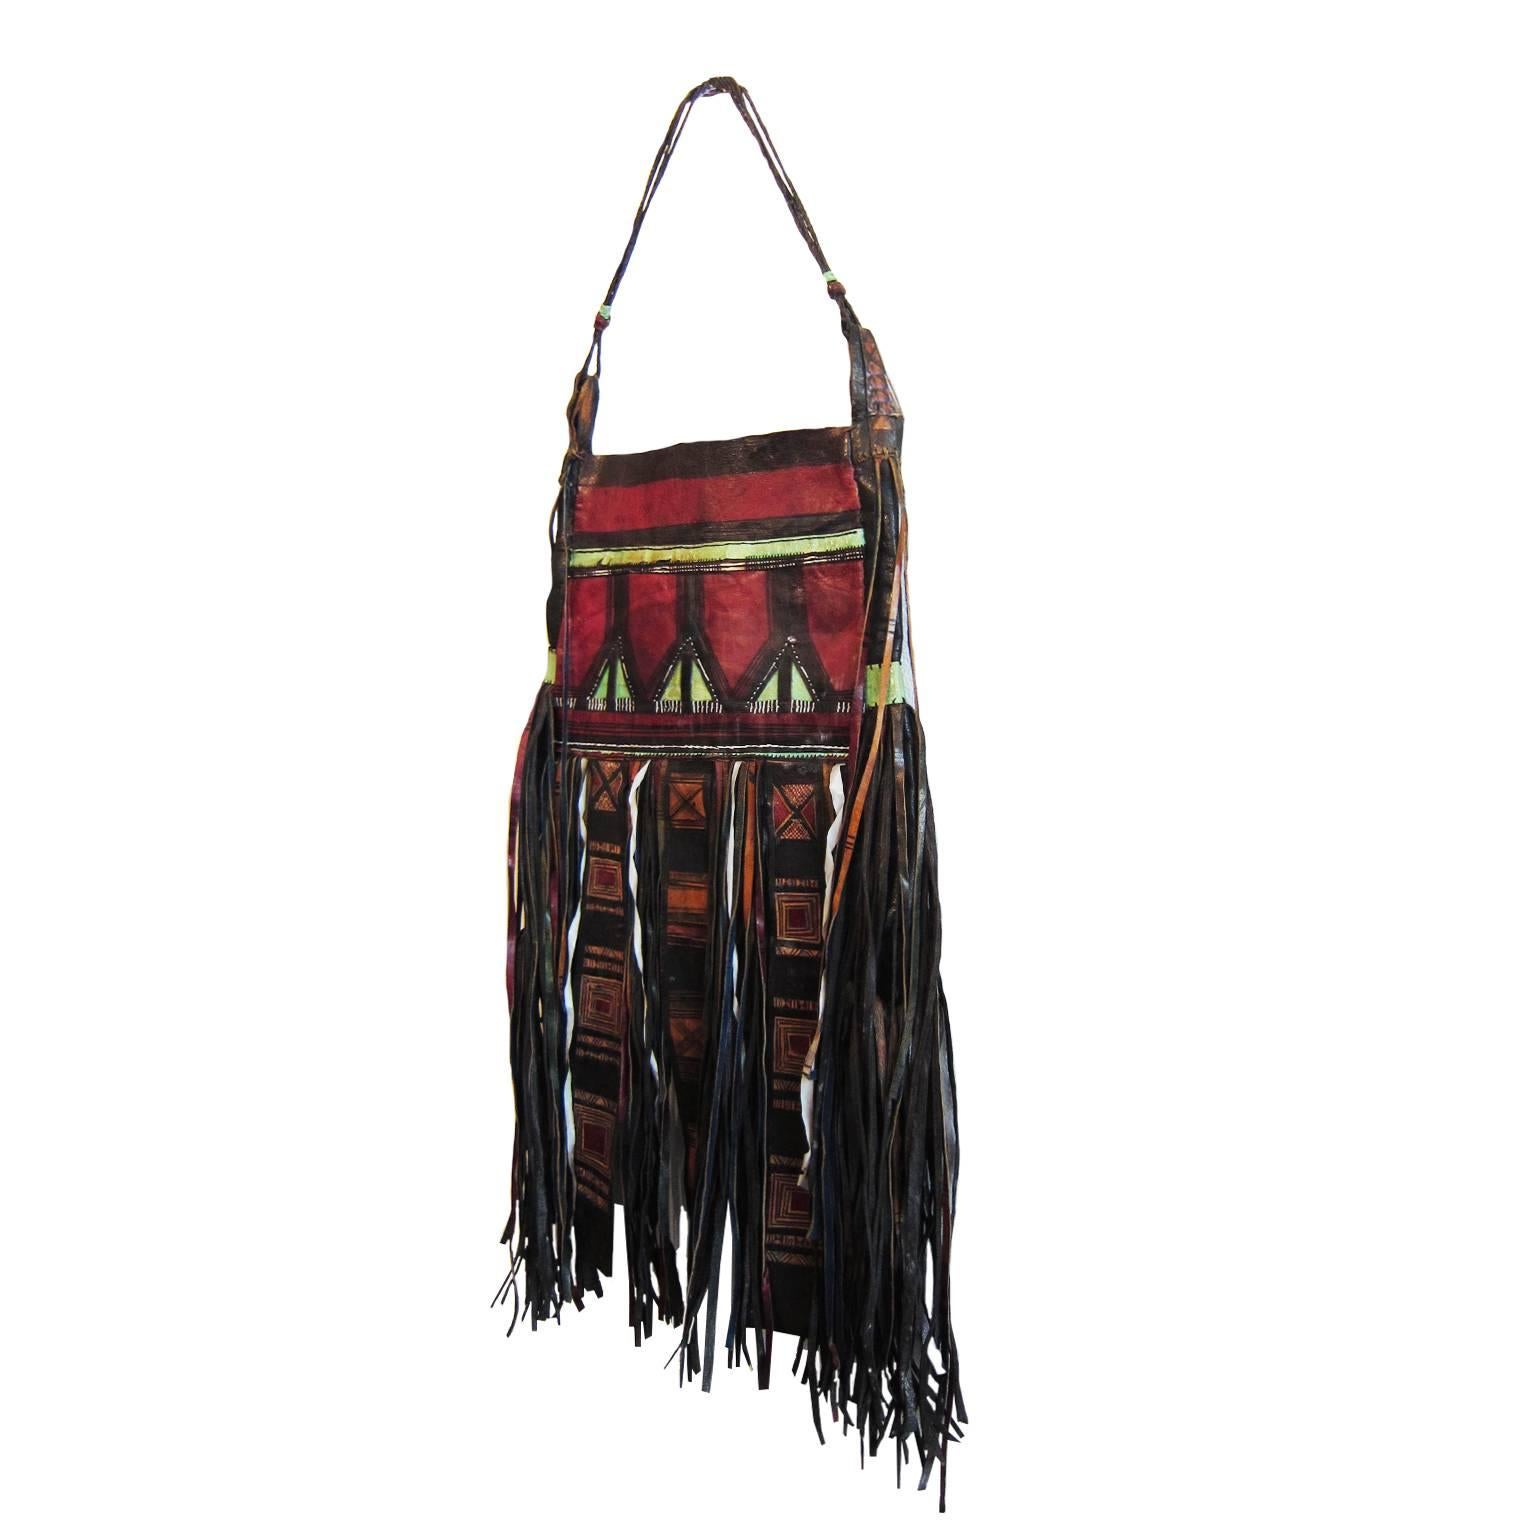 Traditional Tuareg Africa tribally used saharan hand made shoulder bag. 
It is a unique sliding bag with  hand dyed / embroidered / curved leather craft with long fringe. 

Measurments :
22 cm x 33 cm 
Handle : 50 cm 
Fringe : 33 cm

